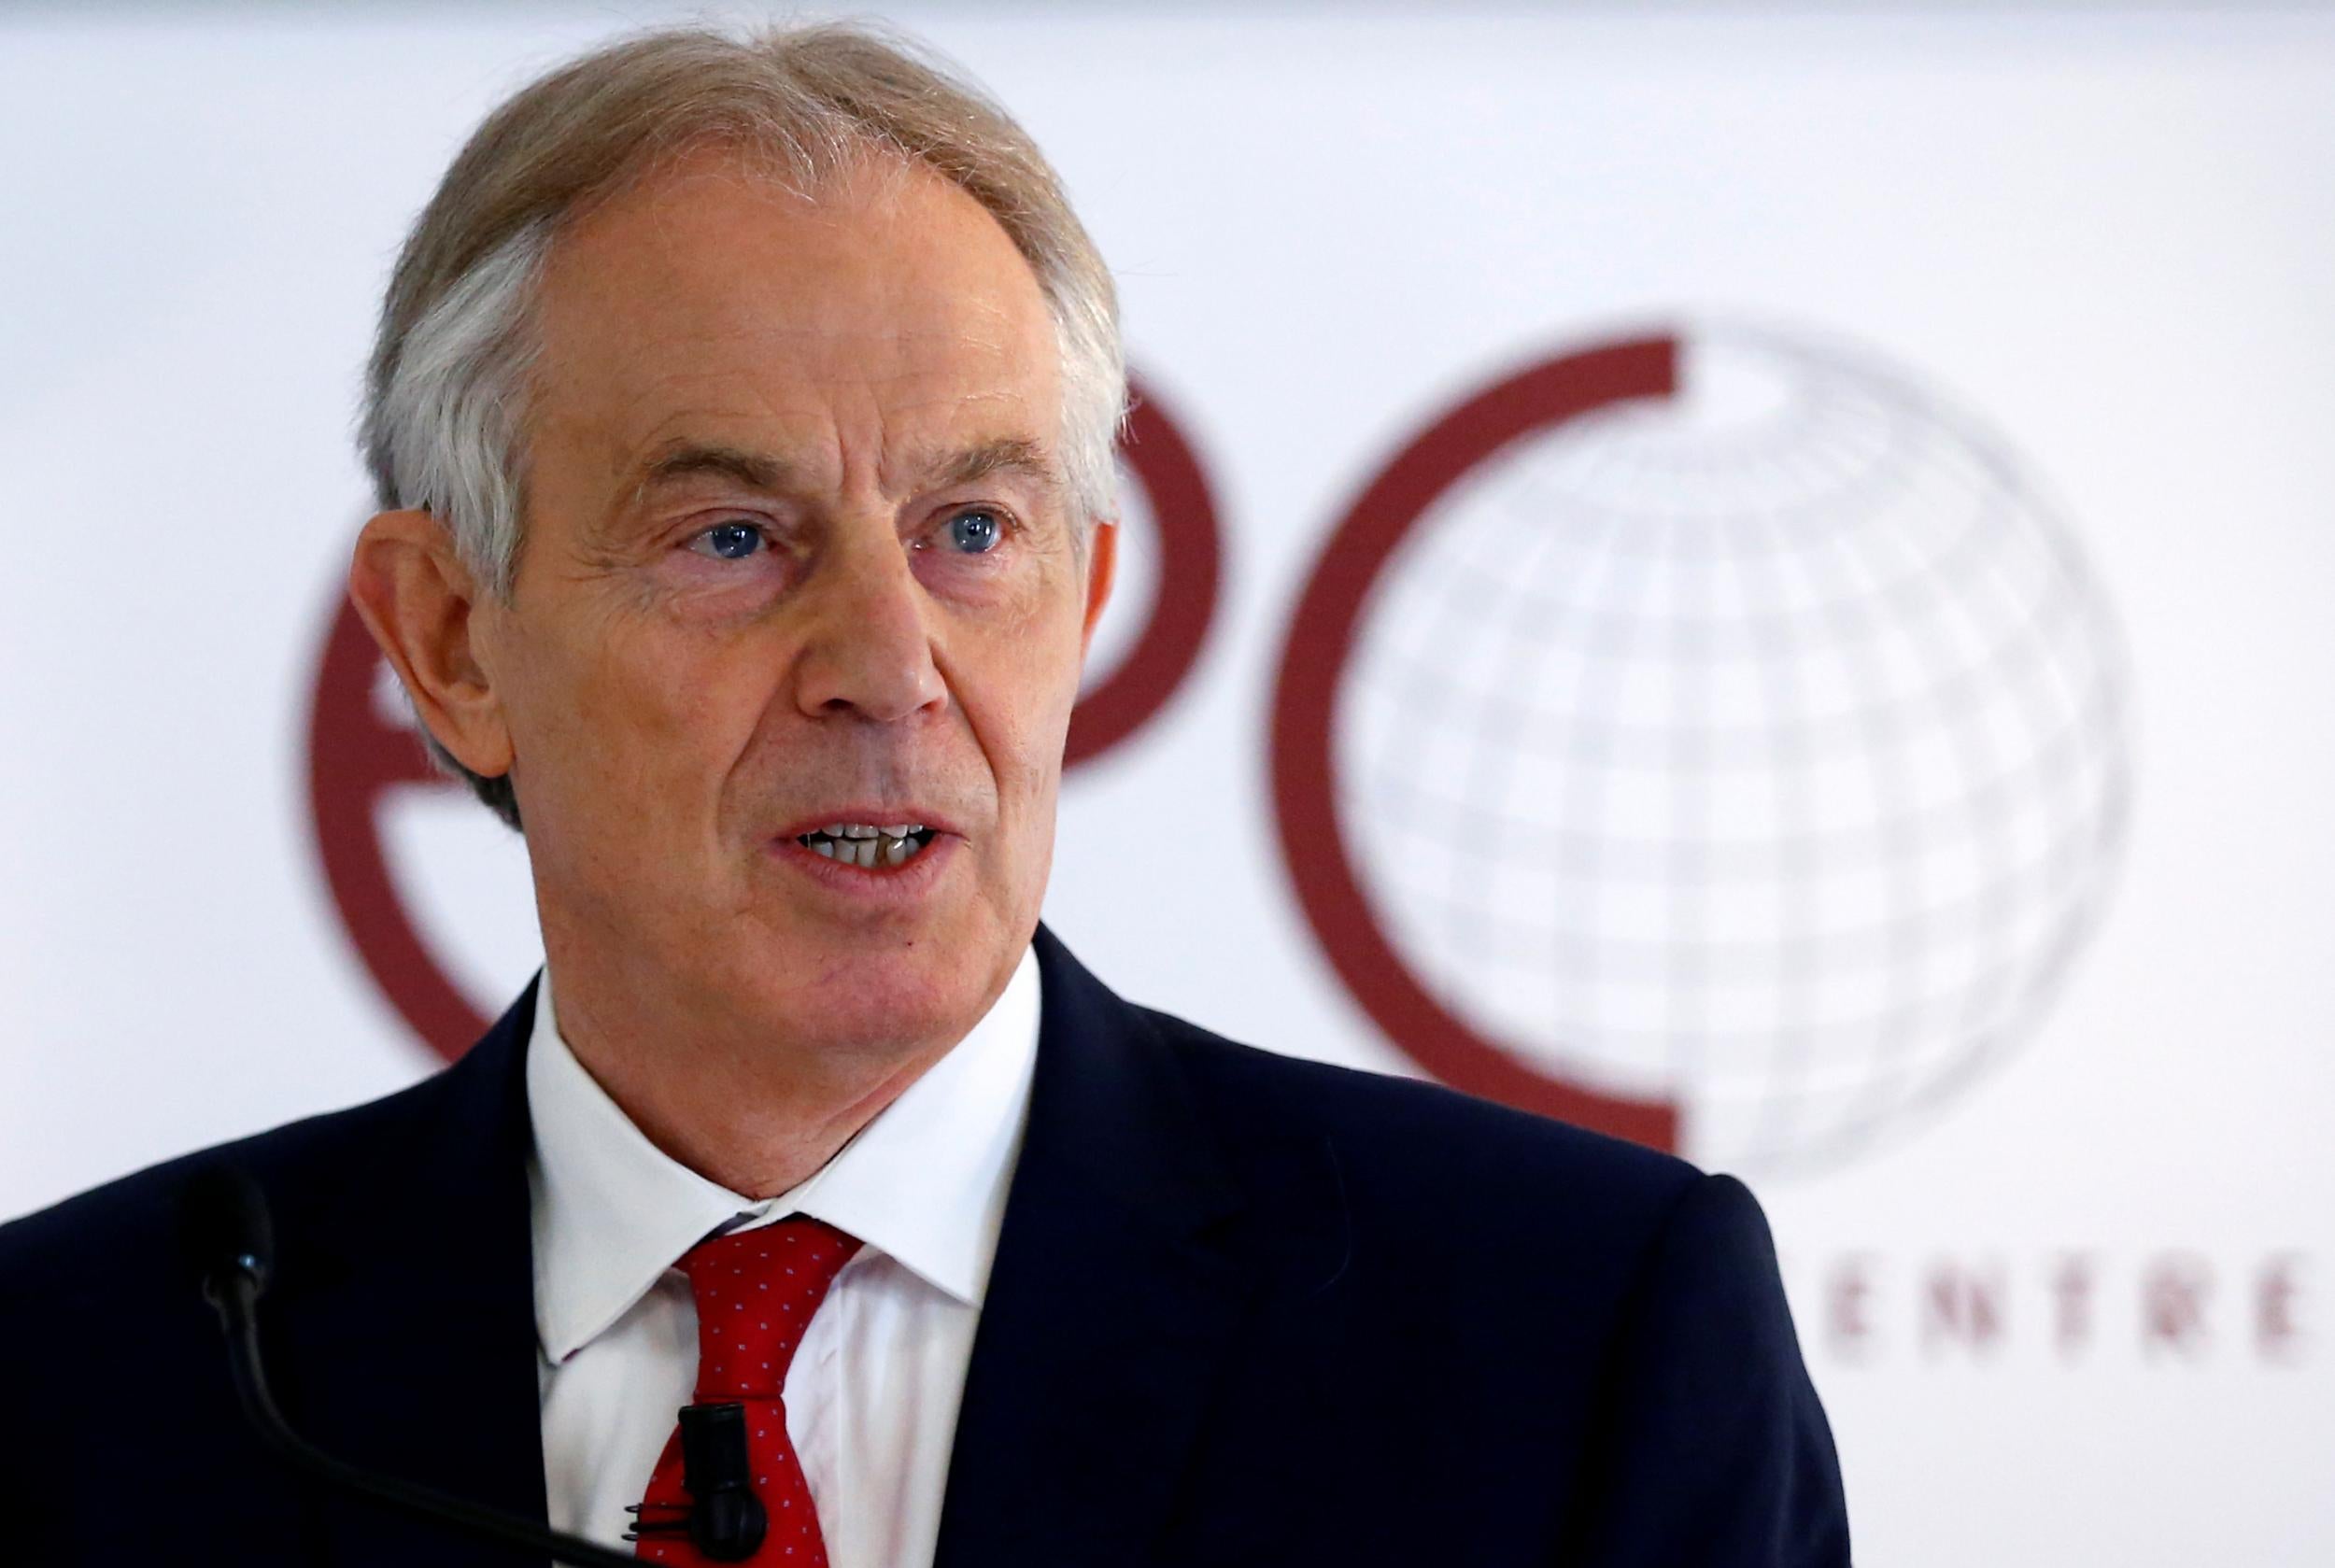 Mr Blair’s speech in Brussels this week divided opinion